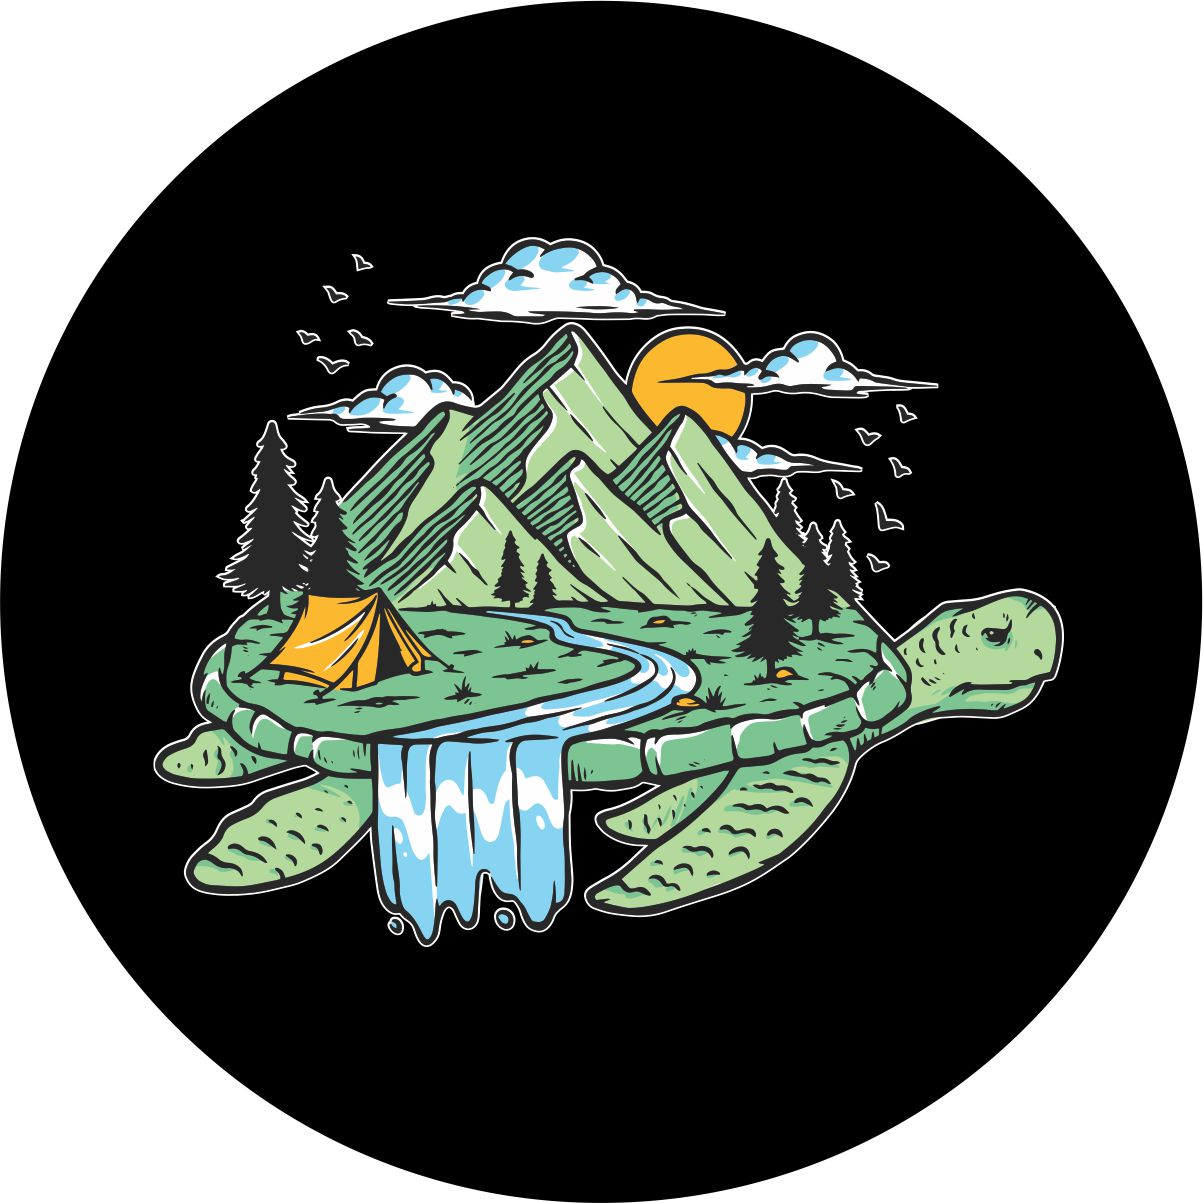 Camping on a turtle island spare tire cover. Beautiful camping scene in the mountains on top of a turtle. Custom spare tire cover design. Printed to order on black vinyl weatherproof material.